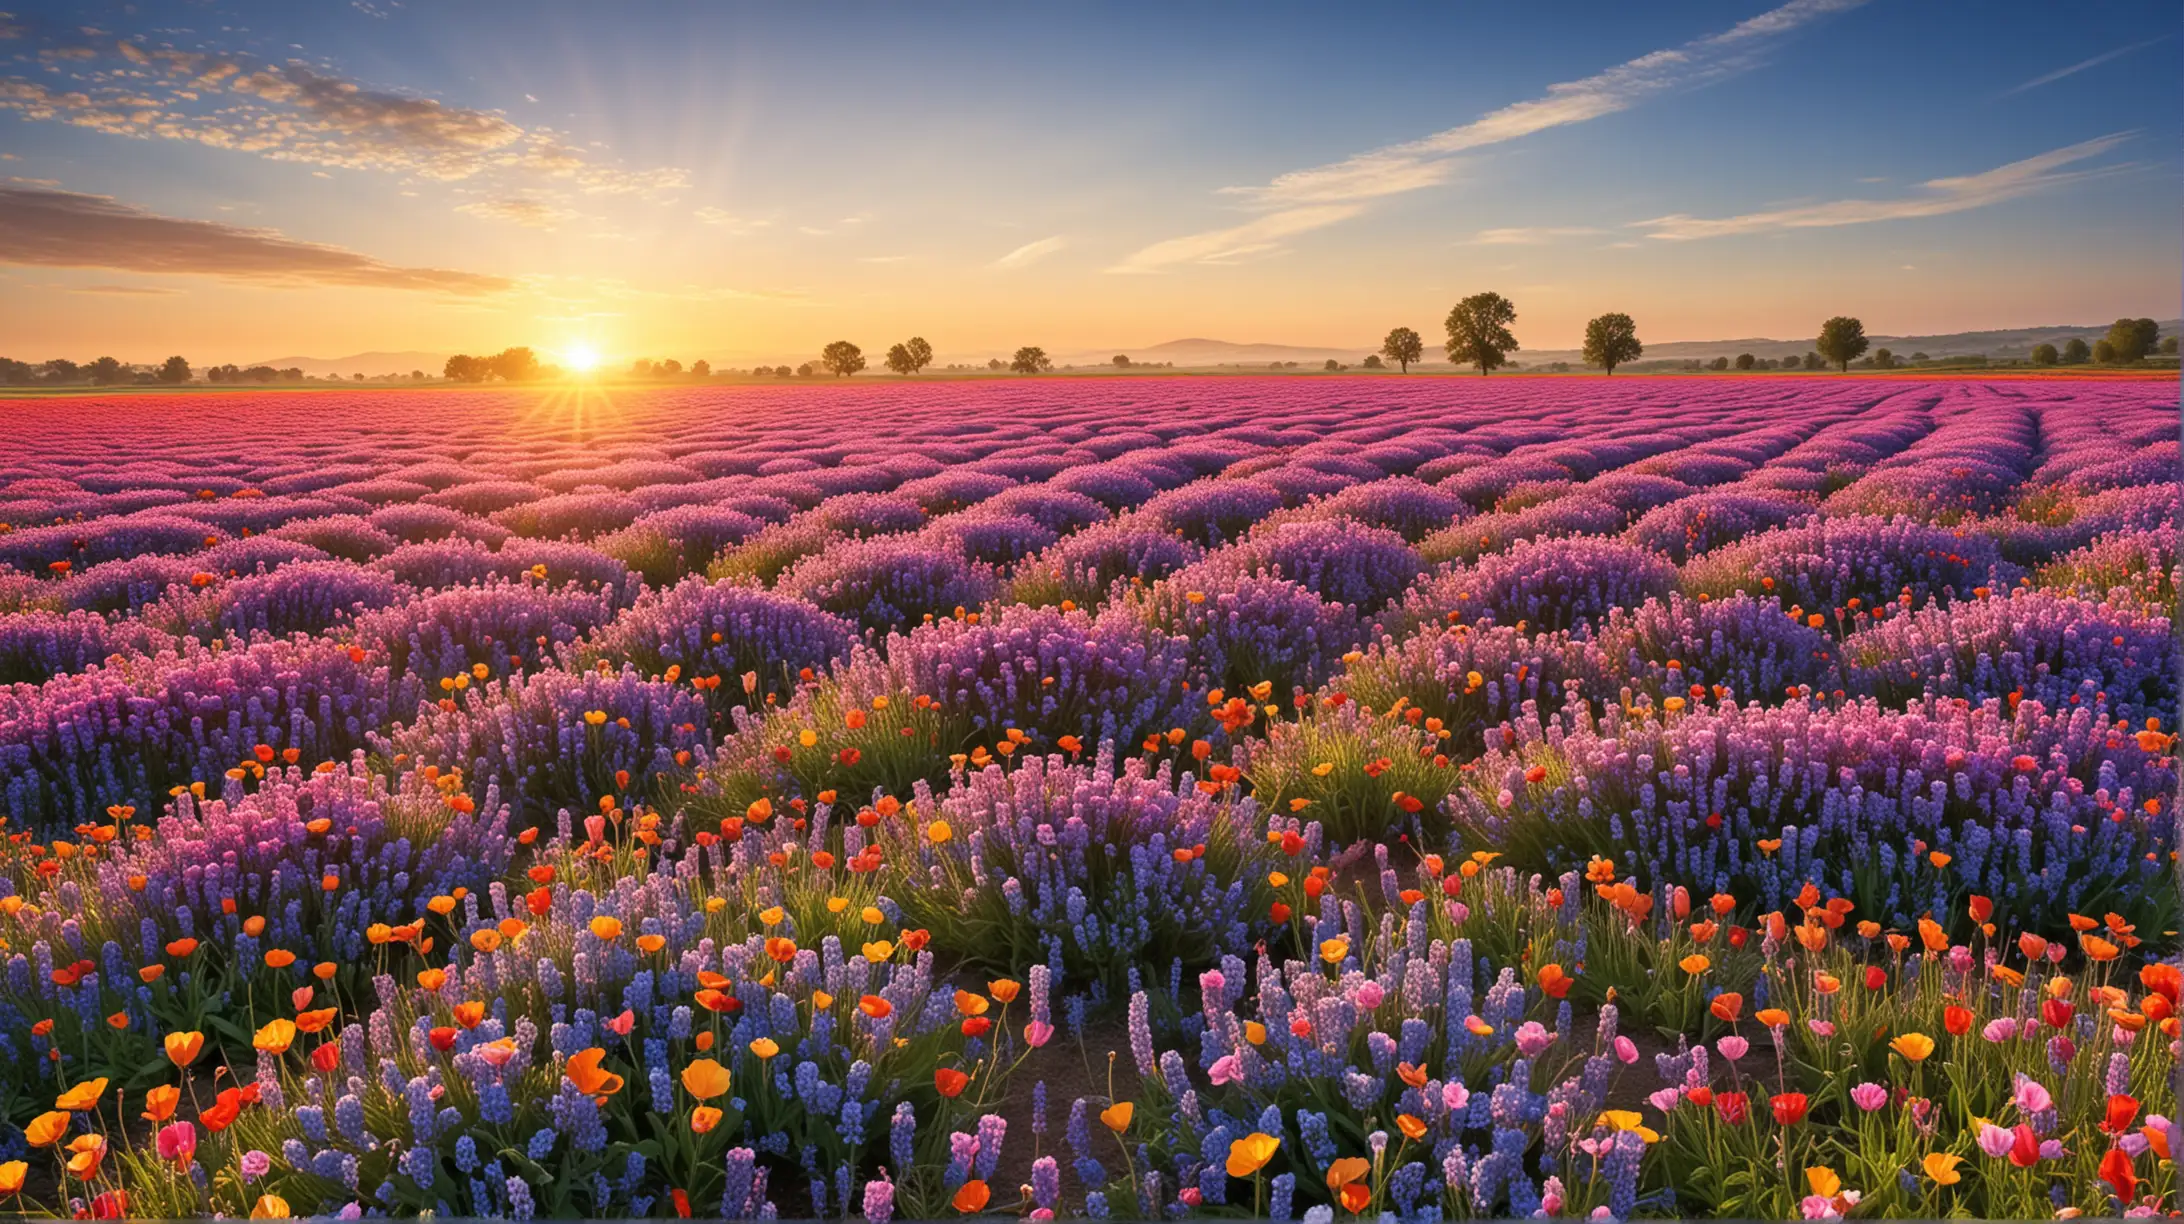 Vibrant Spring Morning Bright and Beautiful Field of Flowers at Sunrise